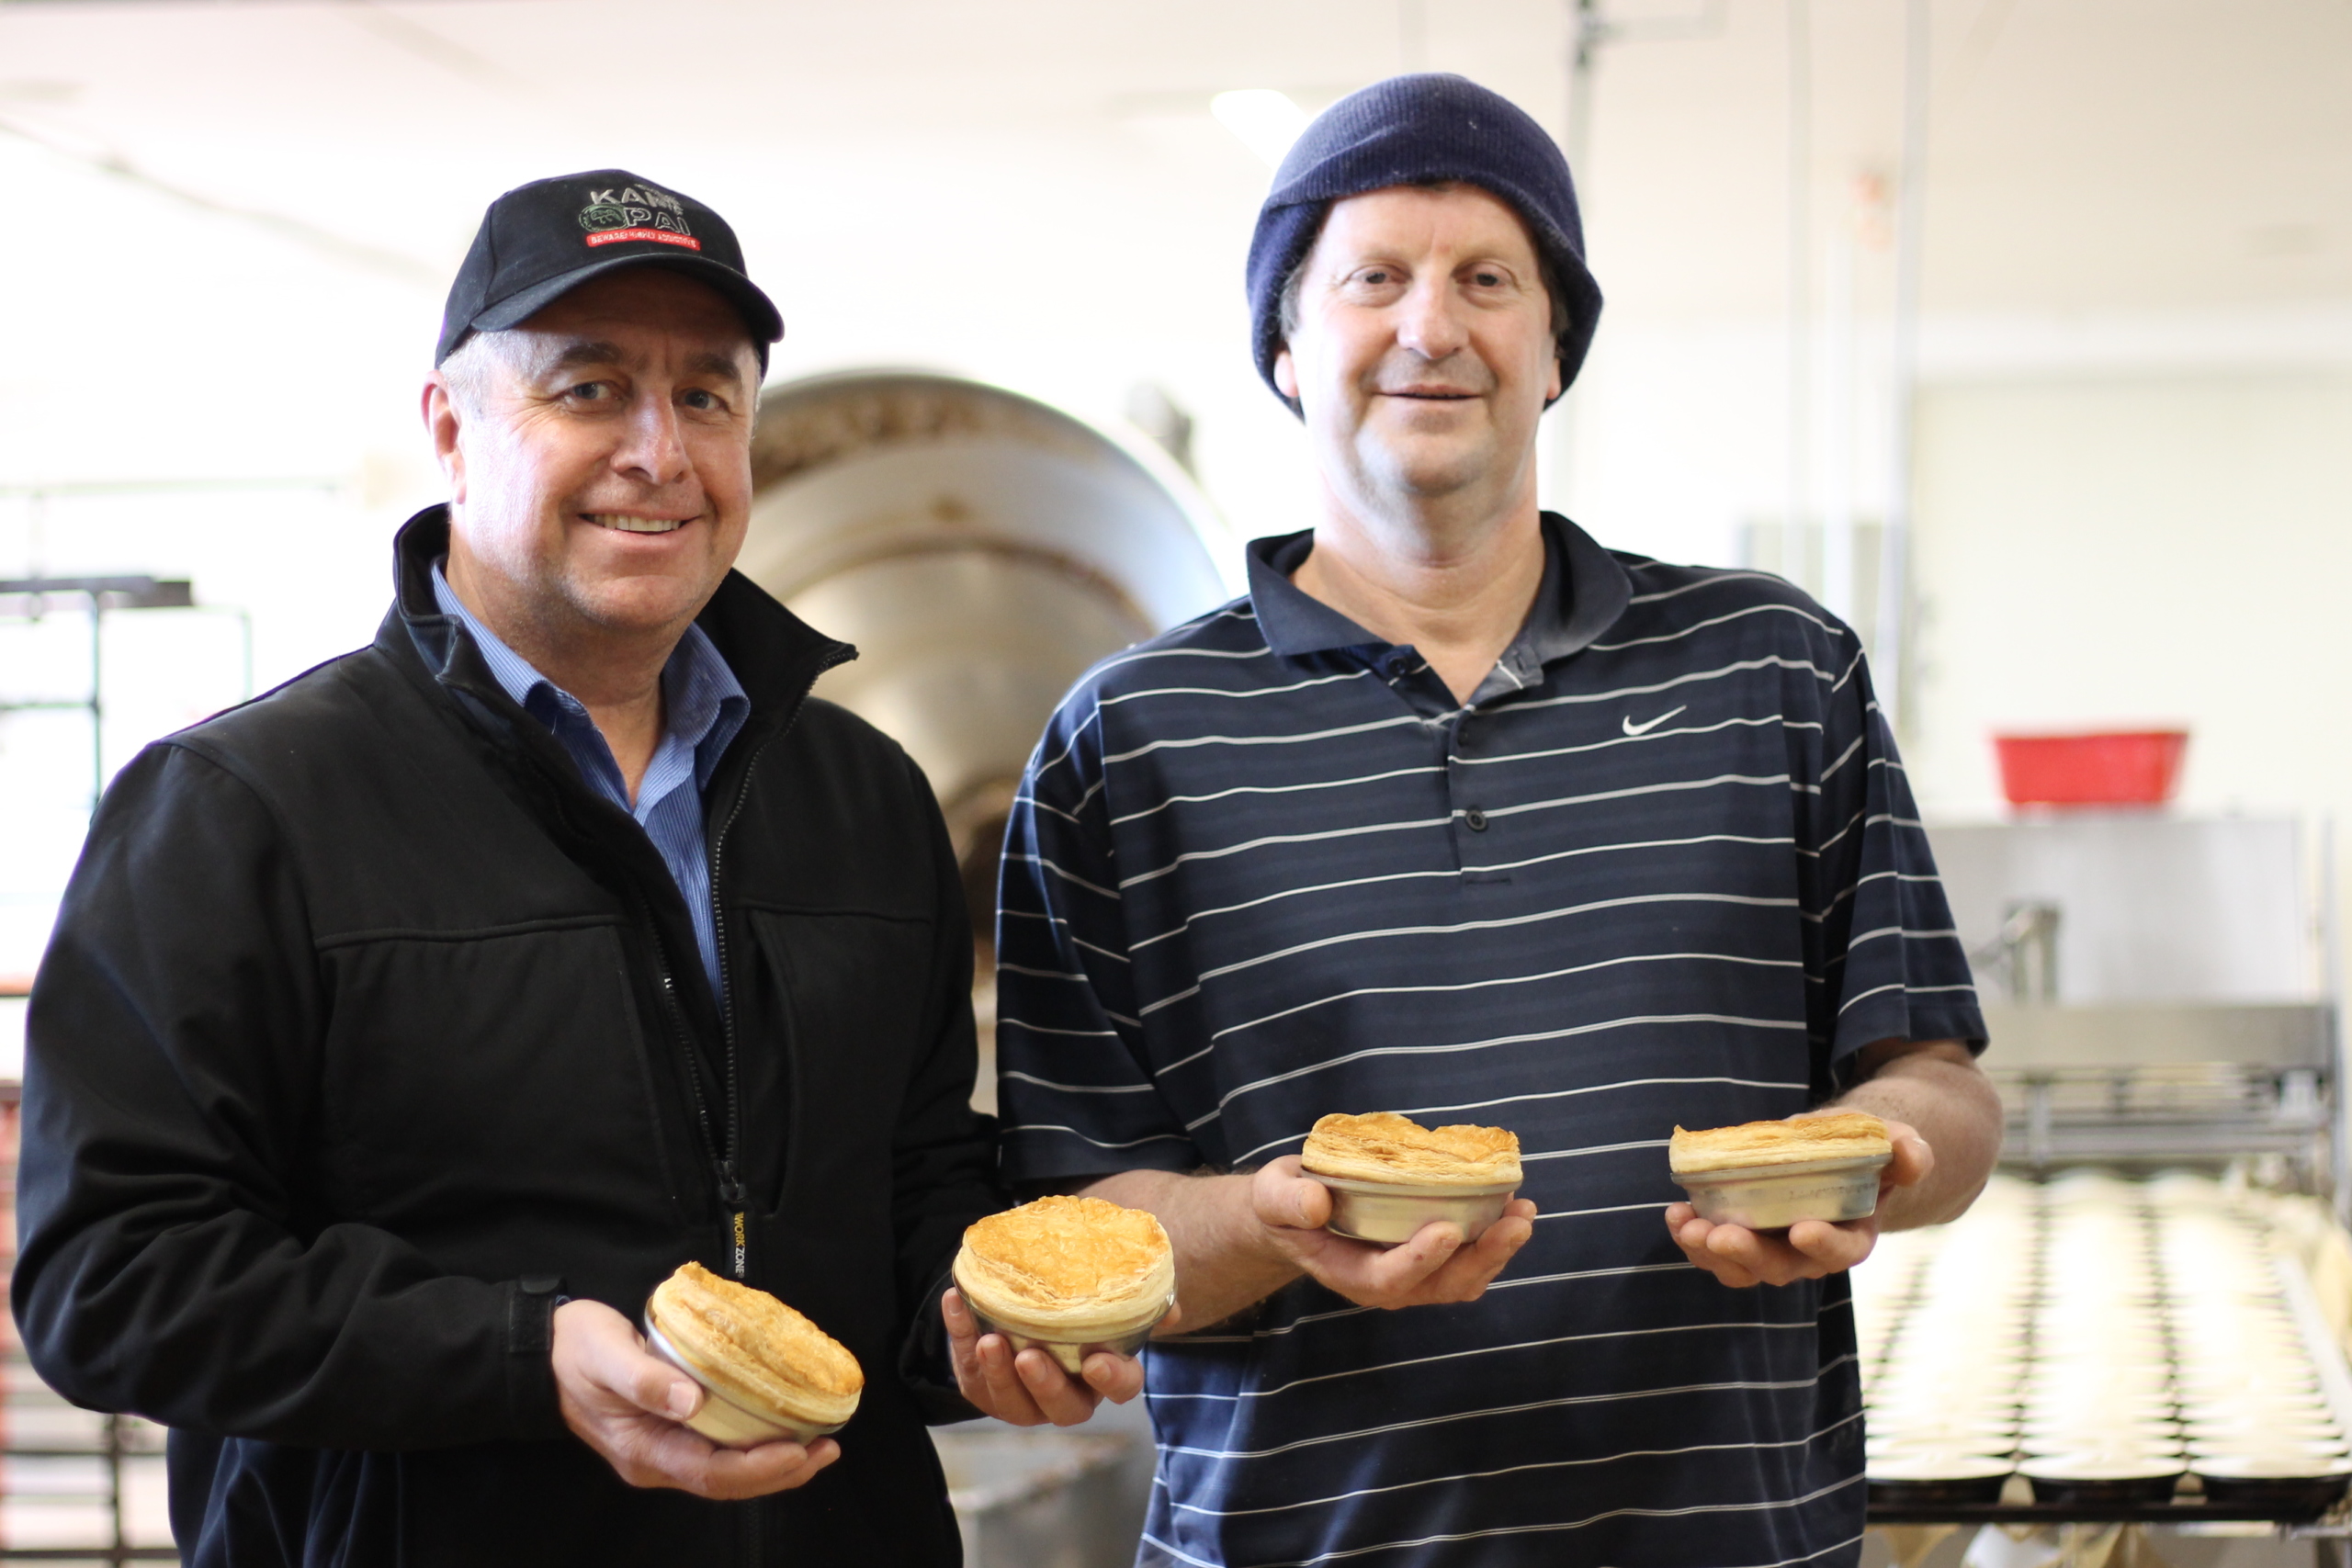 Wanaka’s The Bakery Wholesale secures silver at Supreme Pie Awards